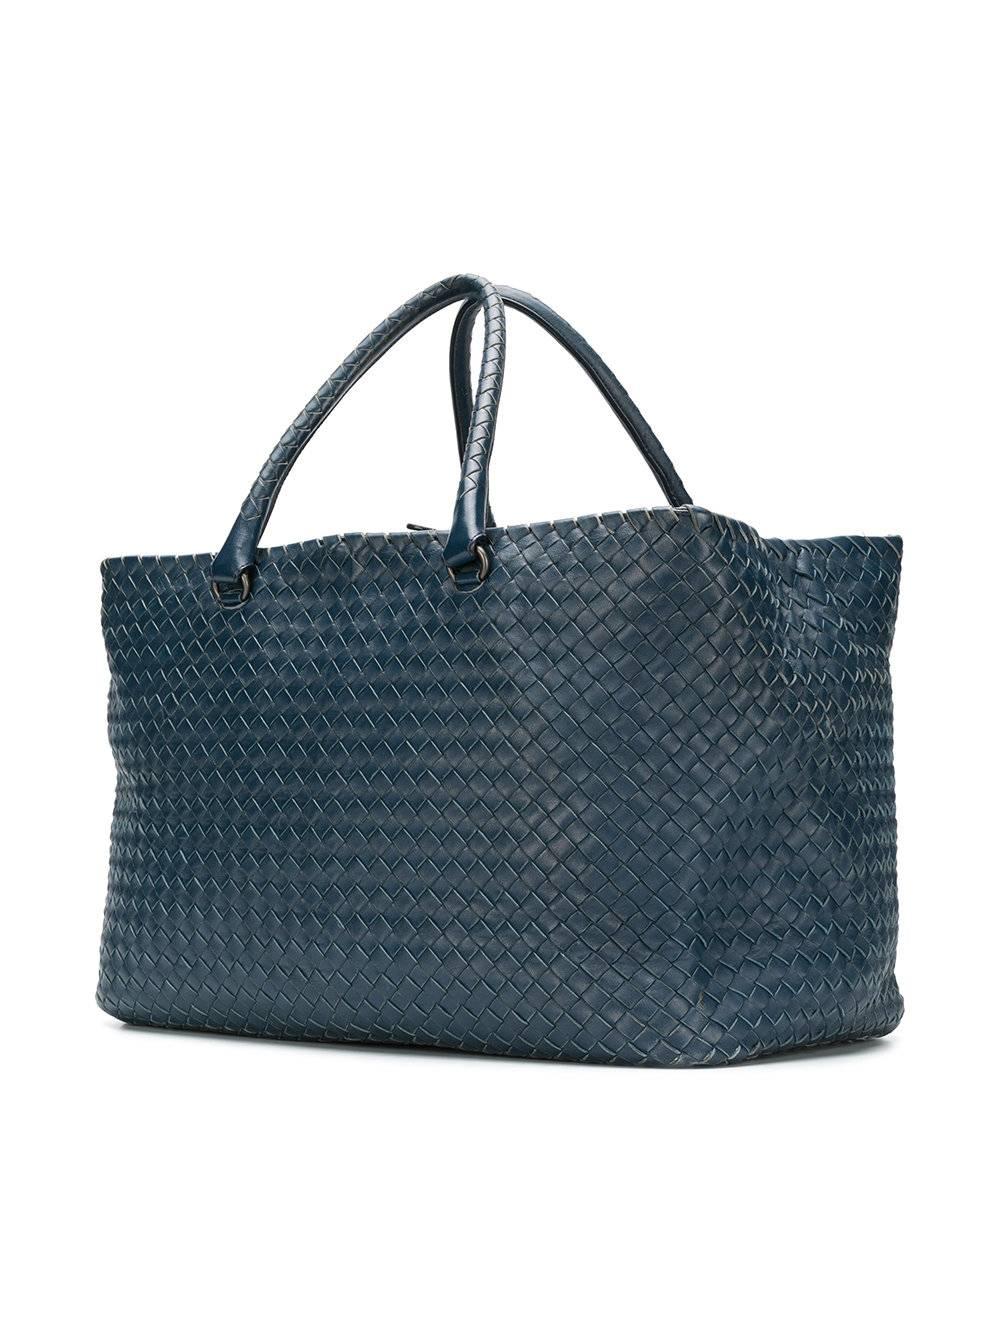 This woven duffle bag by Bottega Veneta Vintage, designed to resist wear and tear is stylish yet functional. Crafted in a navy lambskin, the piece features Bottega’s signature woven leather exterior in a convenient silhouette and comes with pure